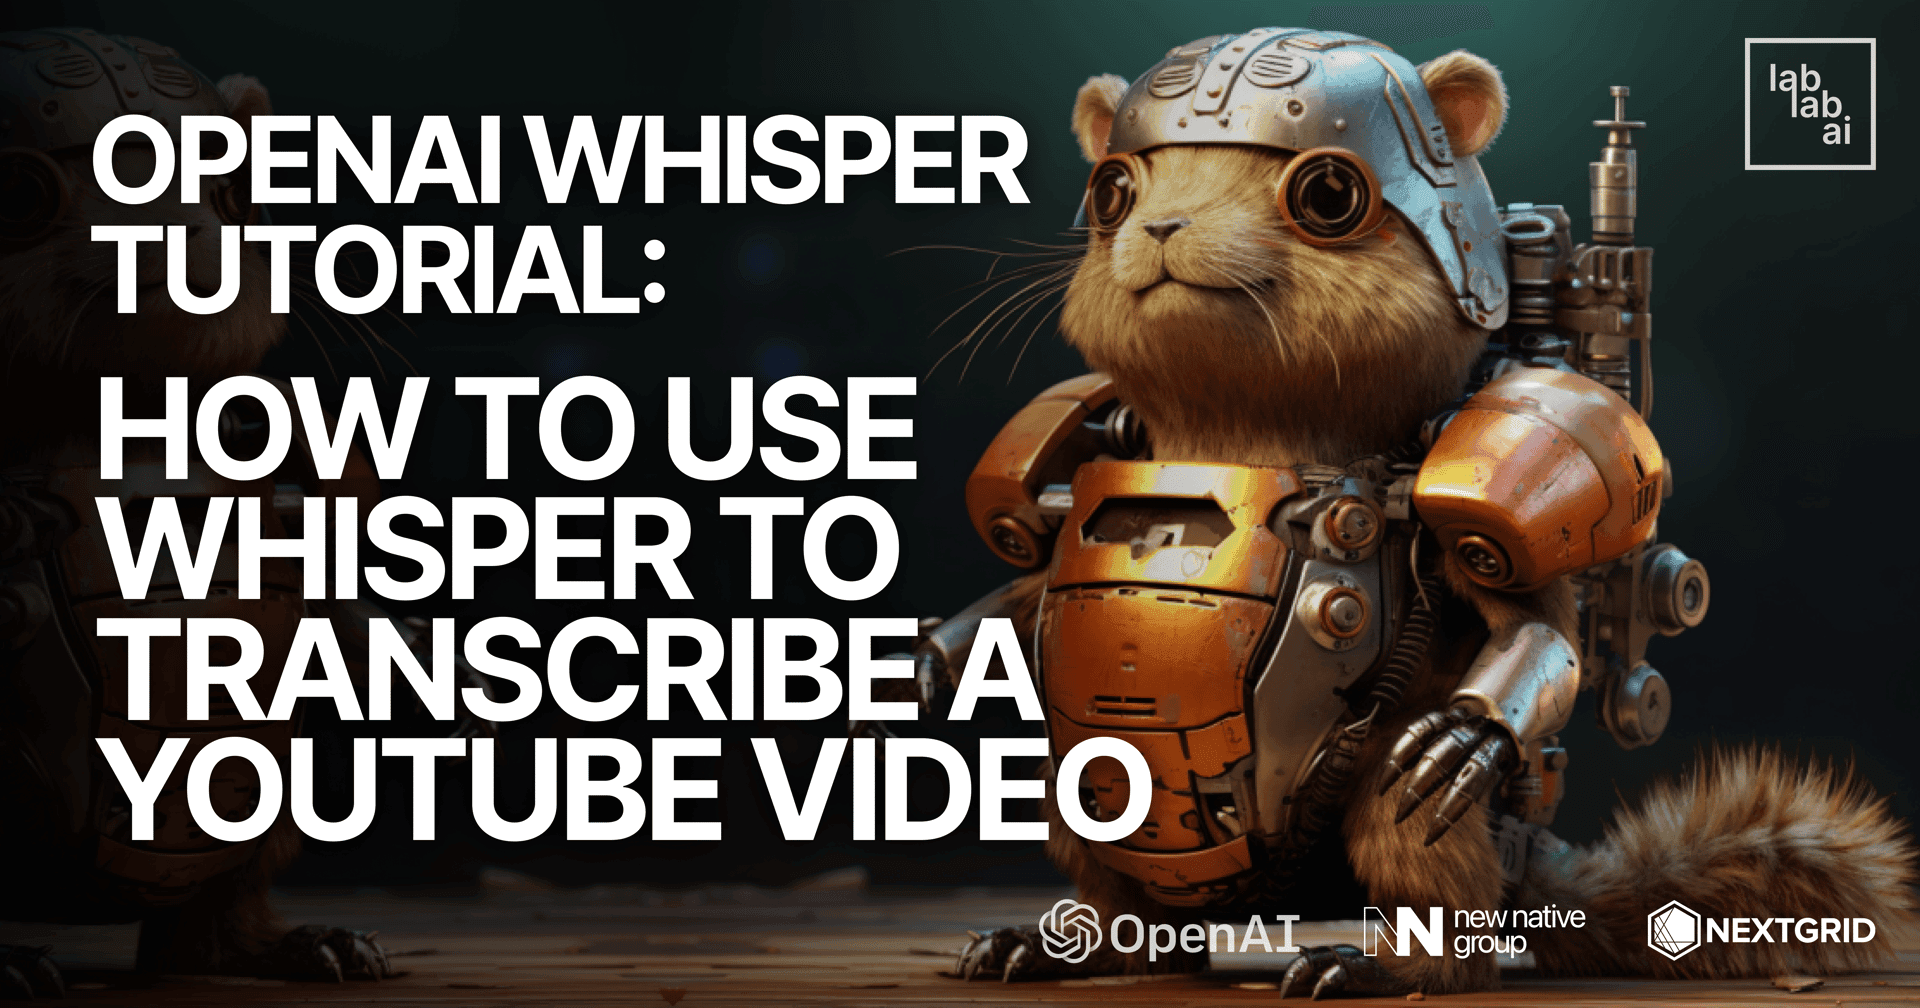 OpenAI Whisper tutorial: How to use Whisper to transcribe a YouTube video